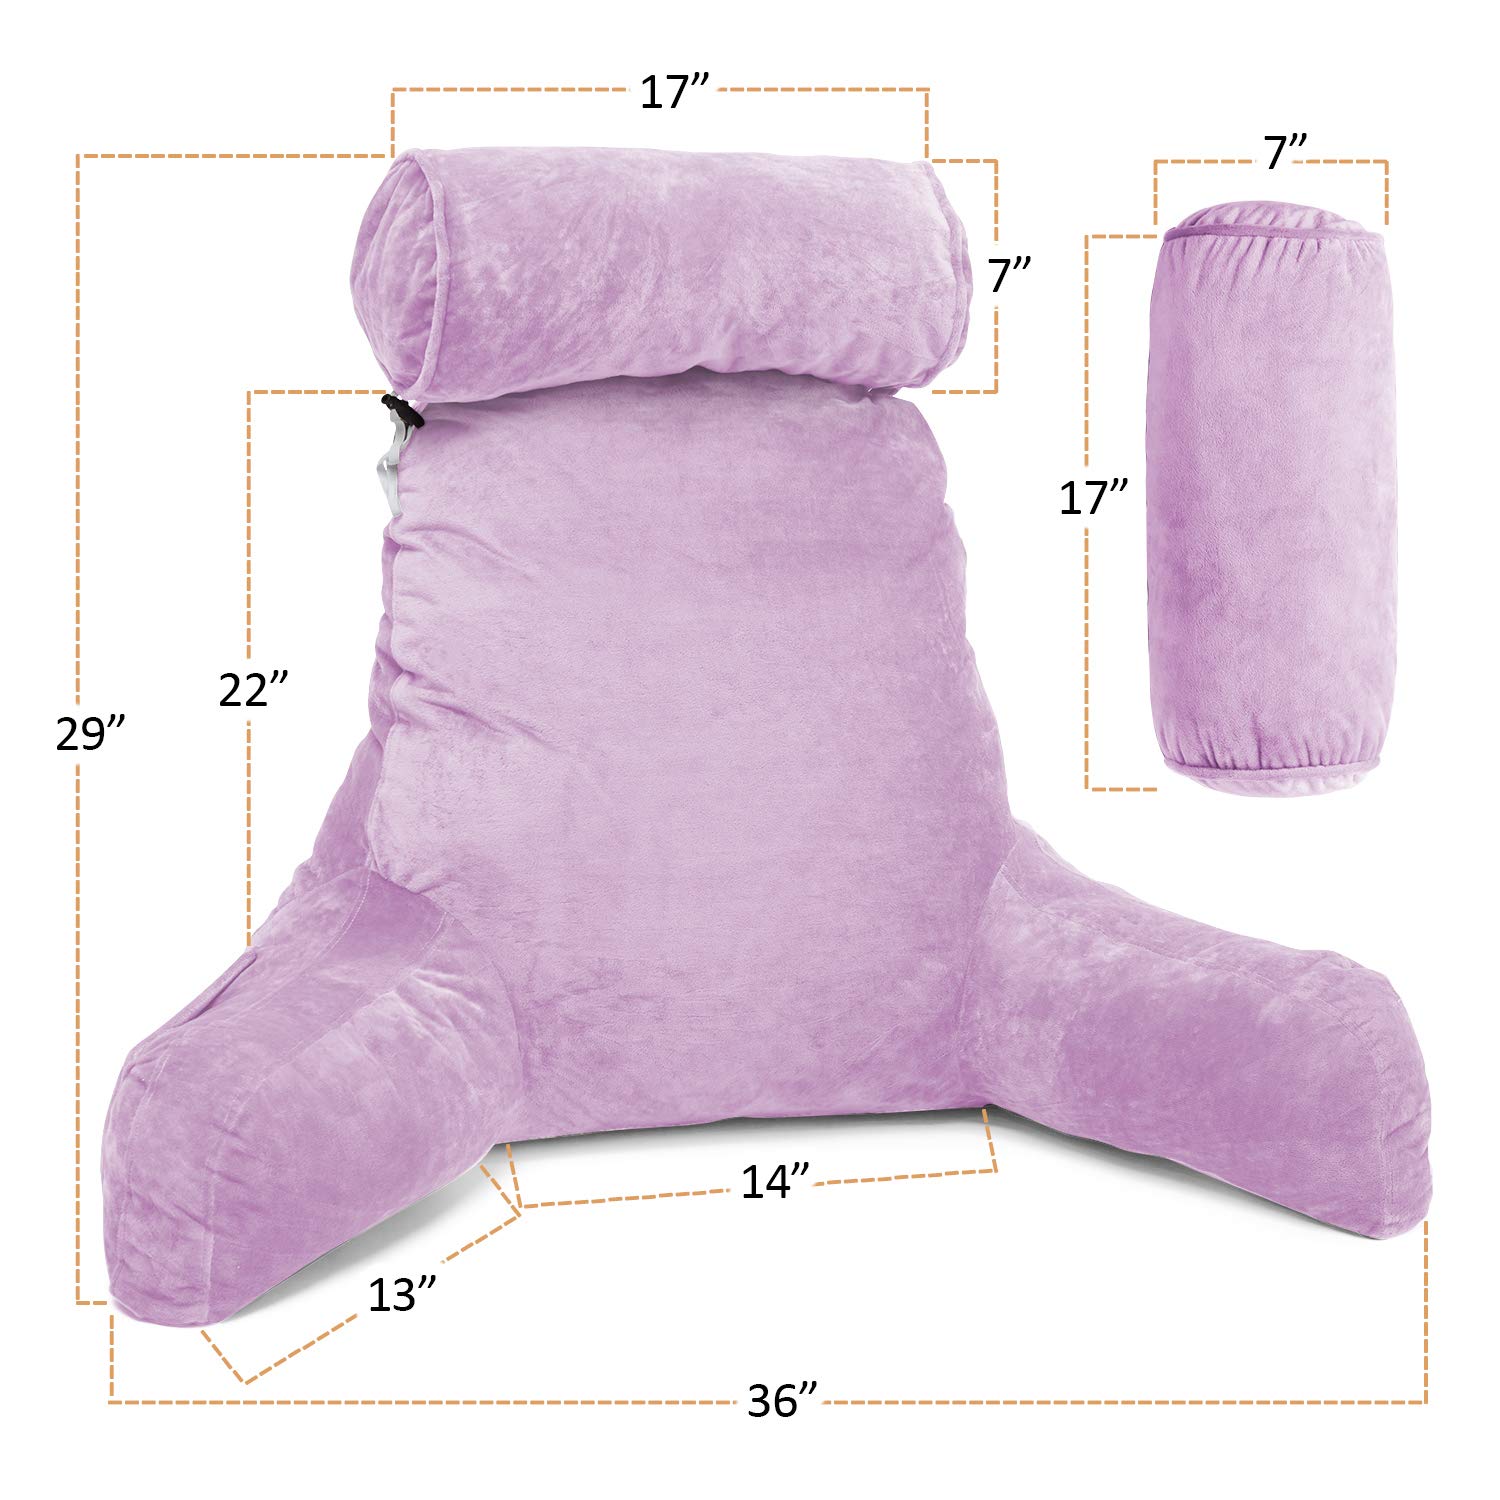 Clara Clark Bed Rest Reading Pillow with Arms and Pockets - Premium Shredded Memory Foam TV Pillow, Detachable Neck Roll & Lumbar Support Pillow, Large, Light Purple - image 5 of 7